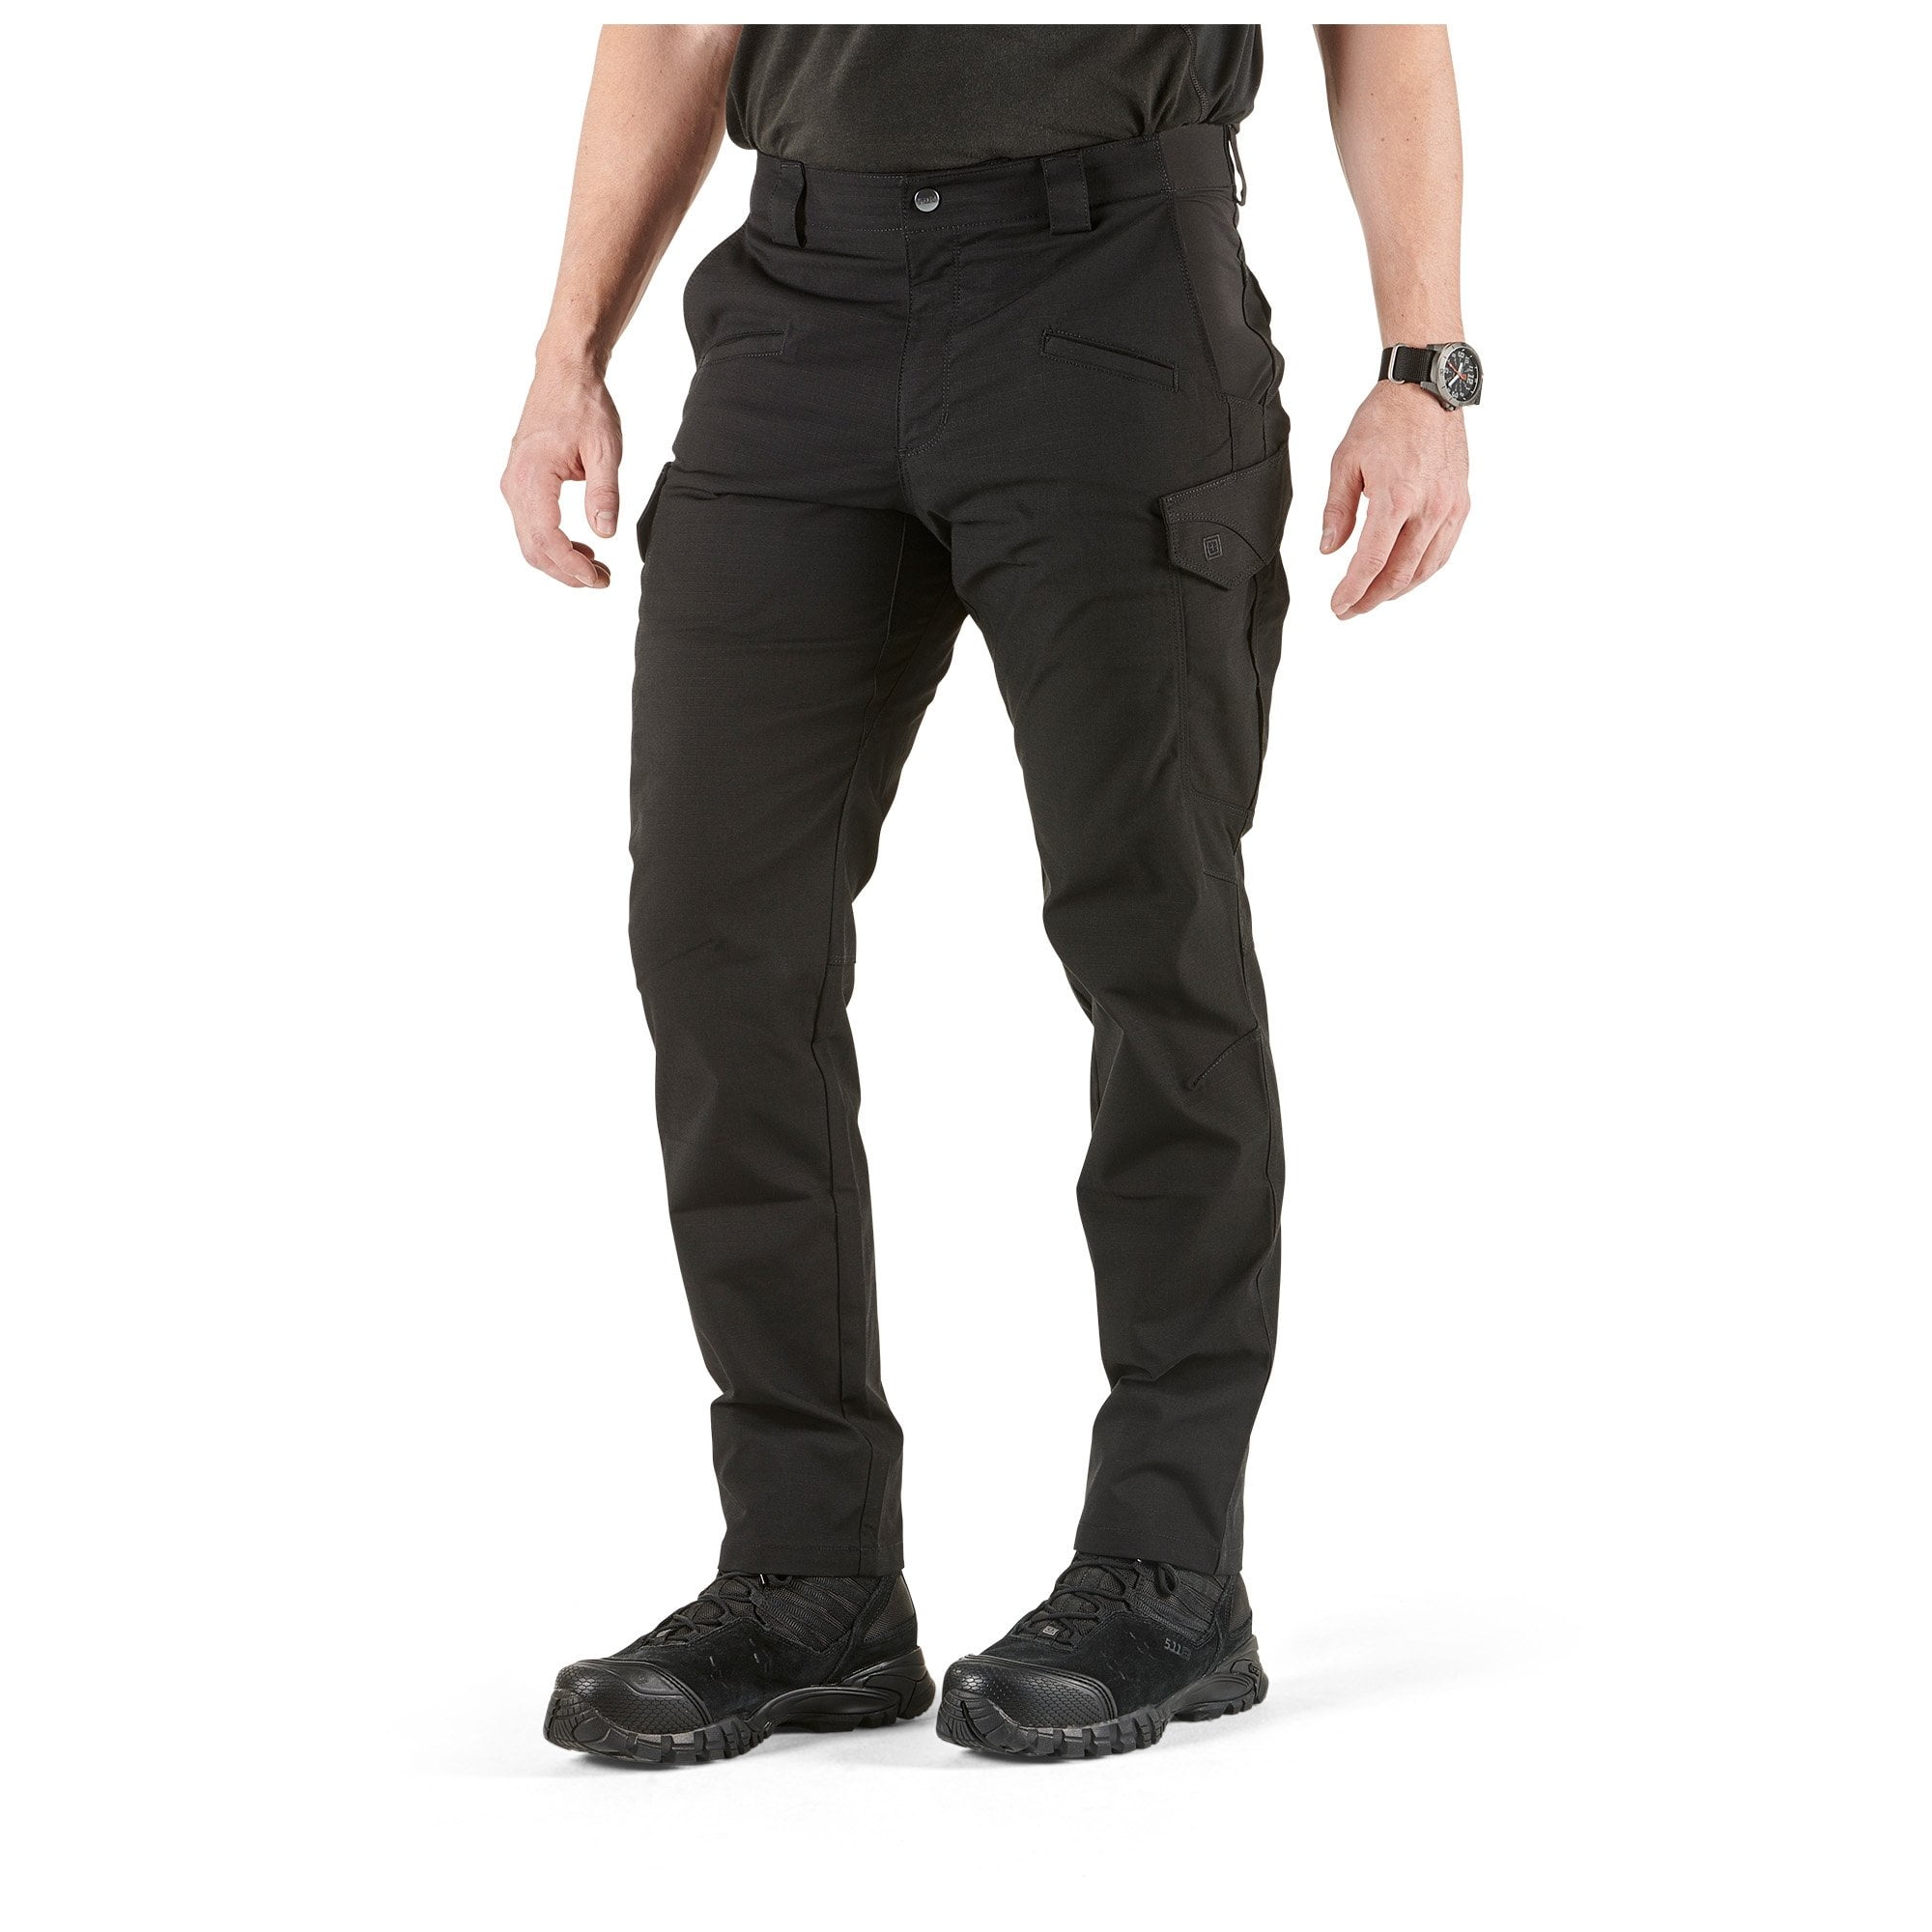 Condor Tac-Ops Pants Cargo Mens Outdoor Ripstop Duty Trousers Black 